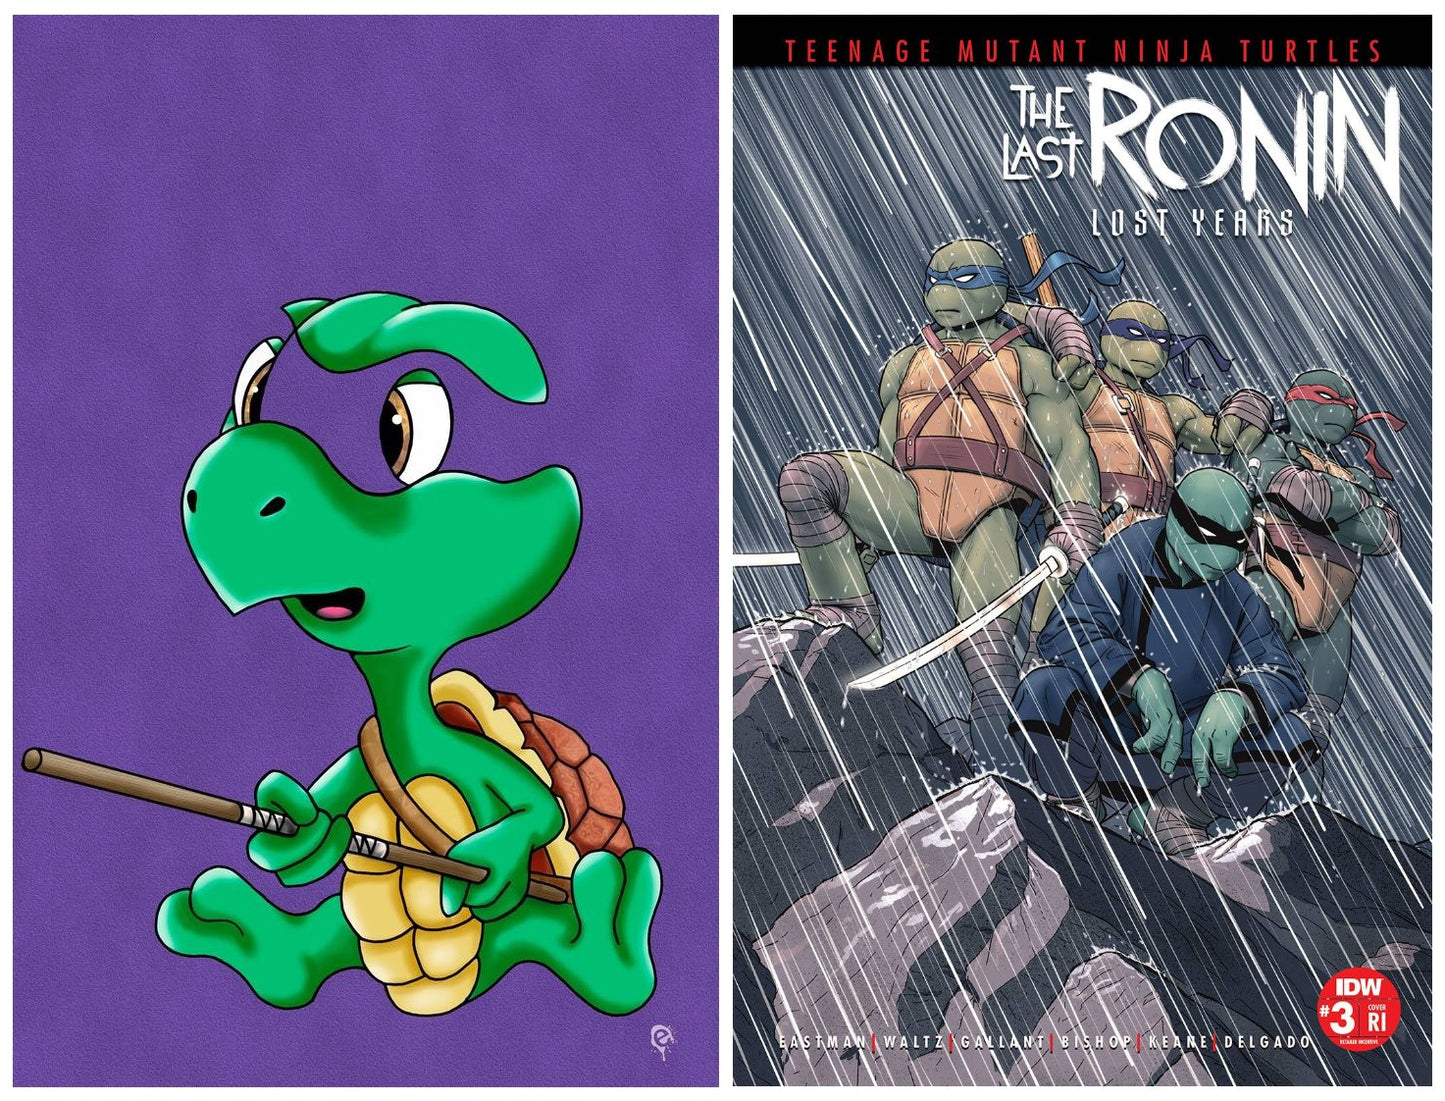 TMNT LAST RONIN LOST YEARS #3 ERIC HEARD NEGATIVE BABY VIRGIN VARIANT LIMITED TO 777 COPIES WITH NUMBERED COA + 1:25 VARIANTS